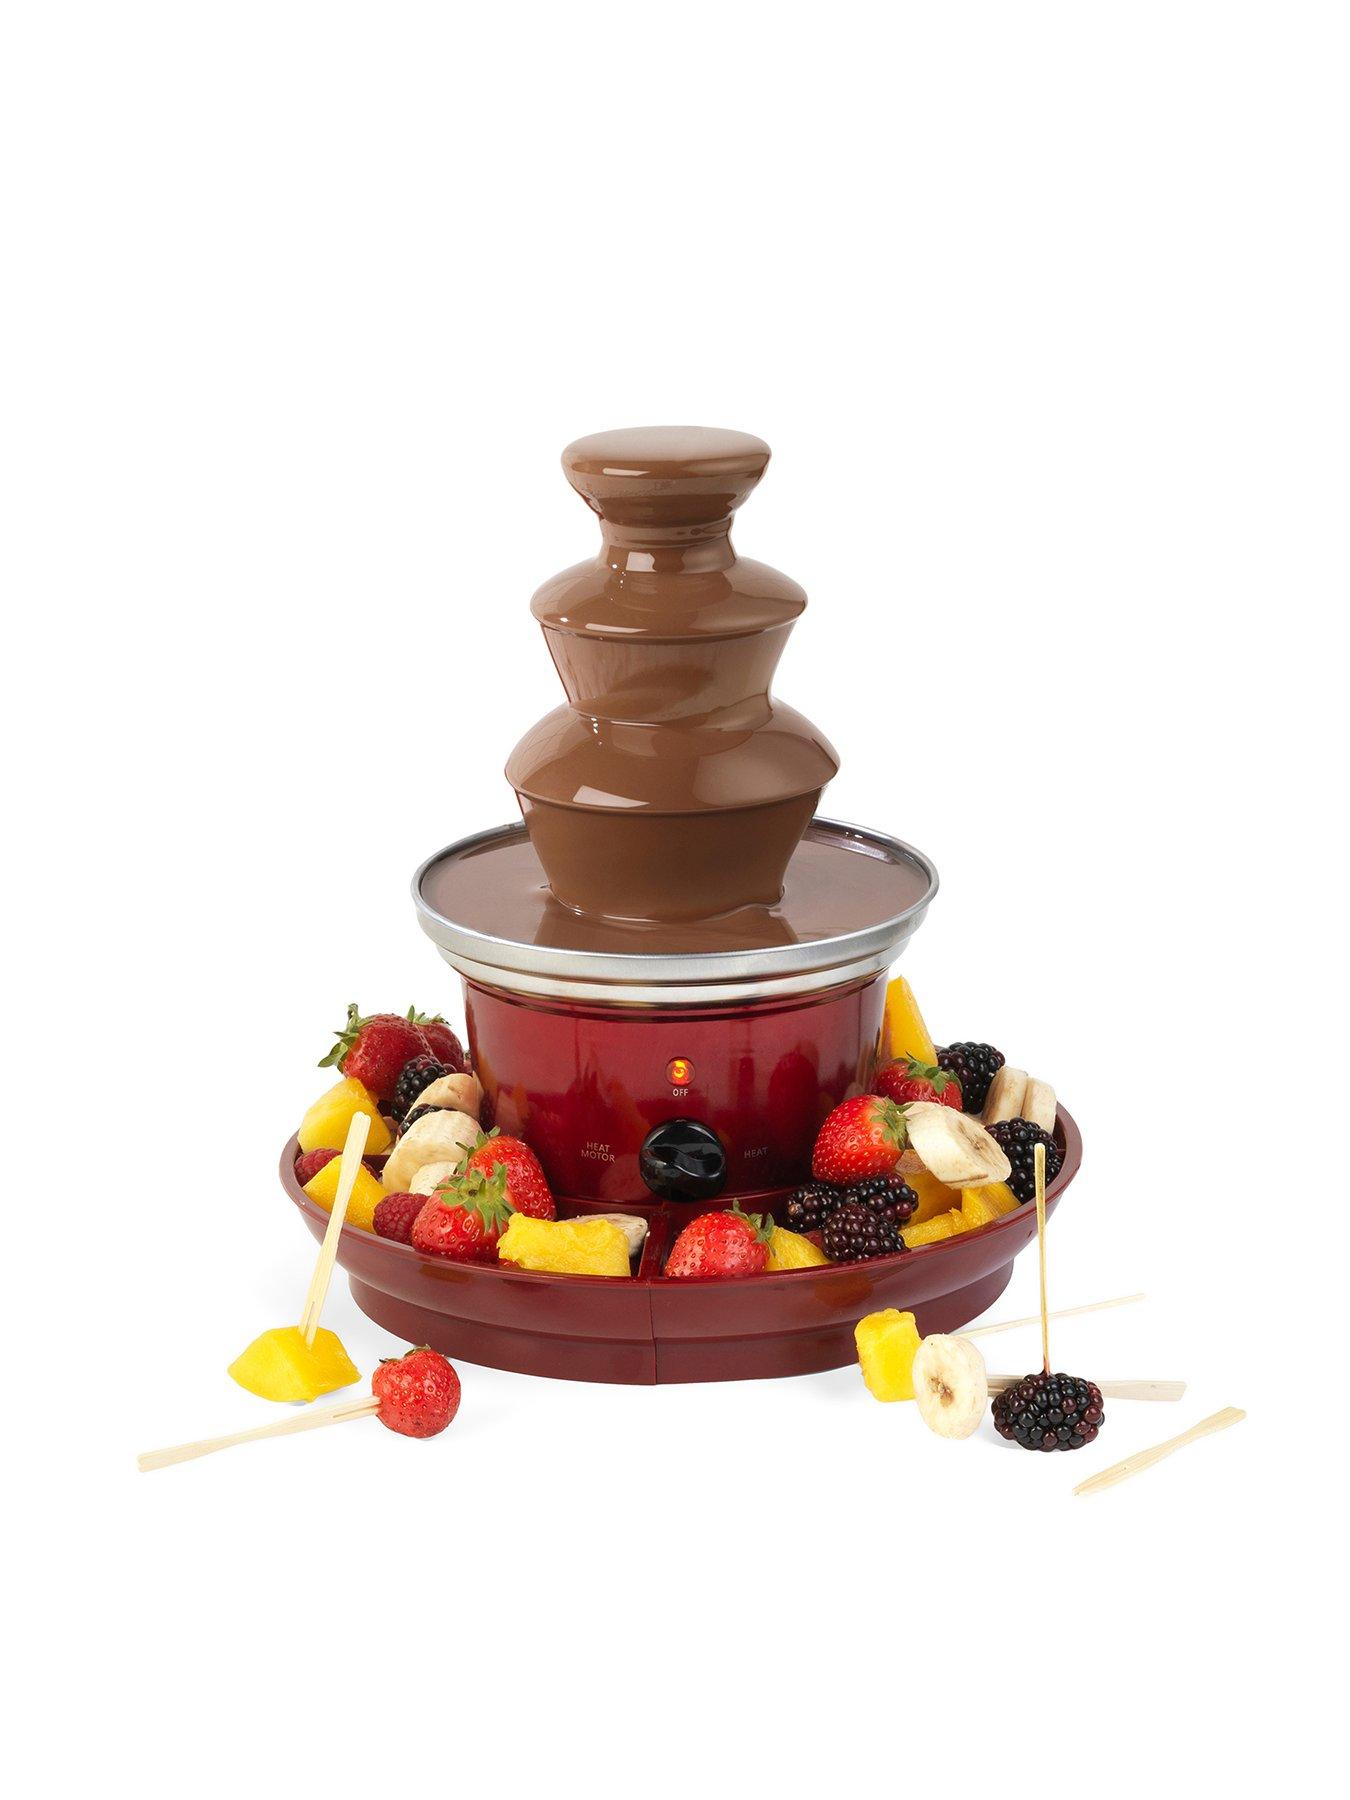 Giles & Posner Chocolate Fountain EK3428G with Fruit Tray and 100 Bamboo  Skewers